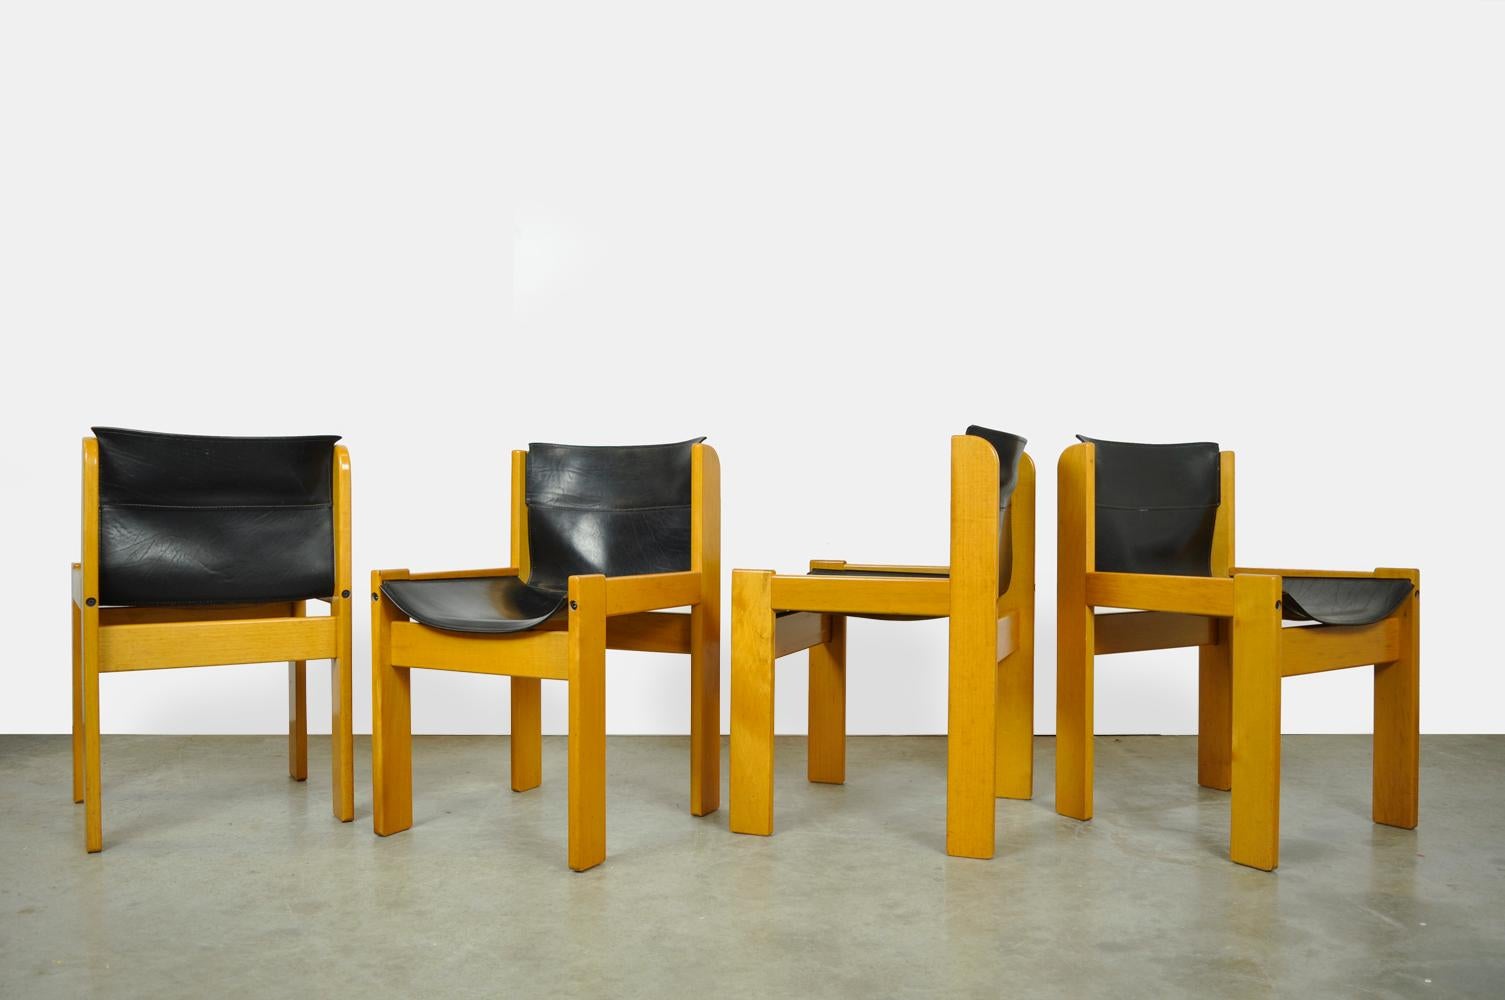 Set of four Italian saddle leather chairs Ibisco, 1970s. Beautiful beech wood frame with black saddle leather seats and back. The backrest is attached at the top with a steel pin. The chairs can be completely disassembled for transport. Beautiful